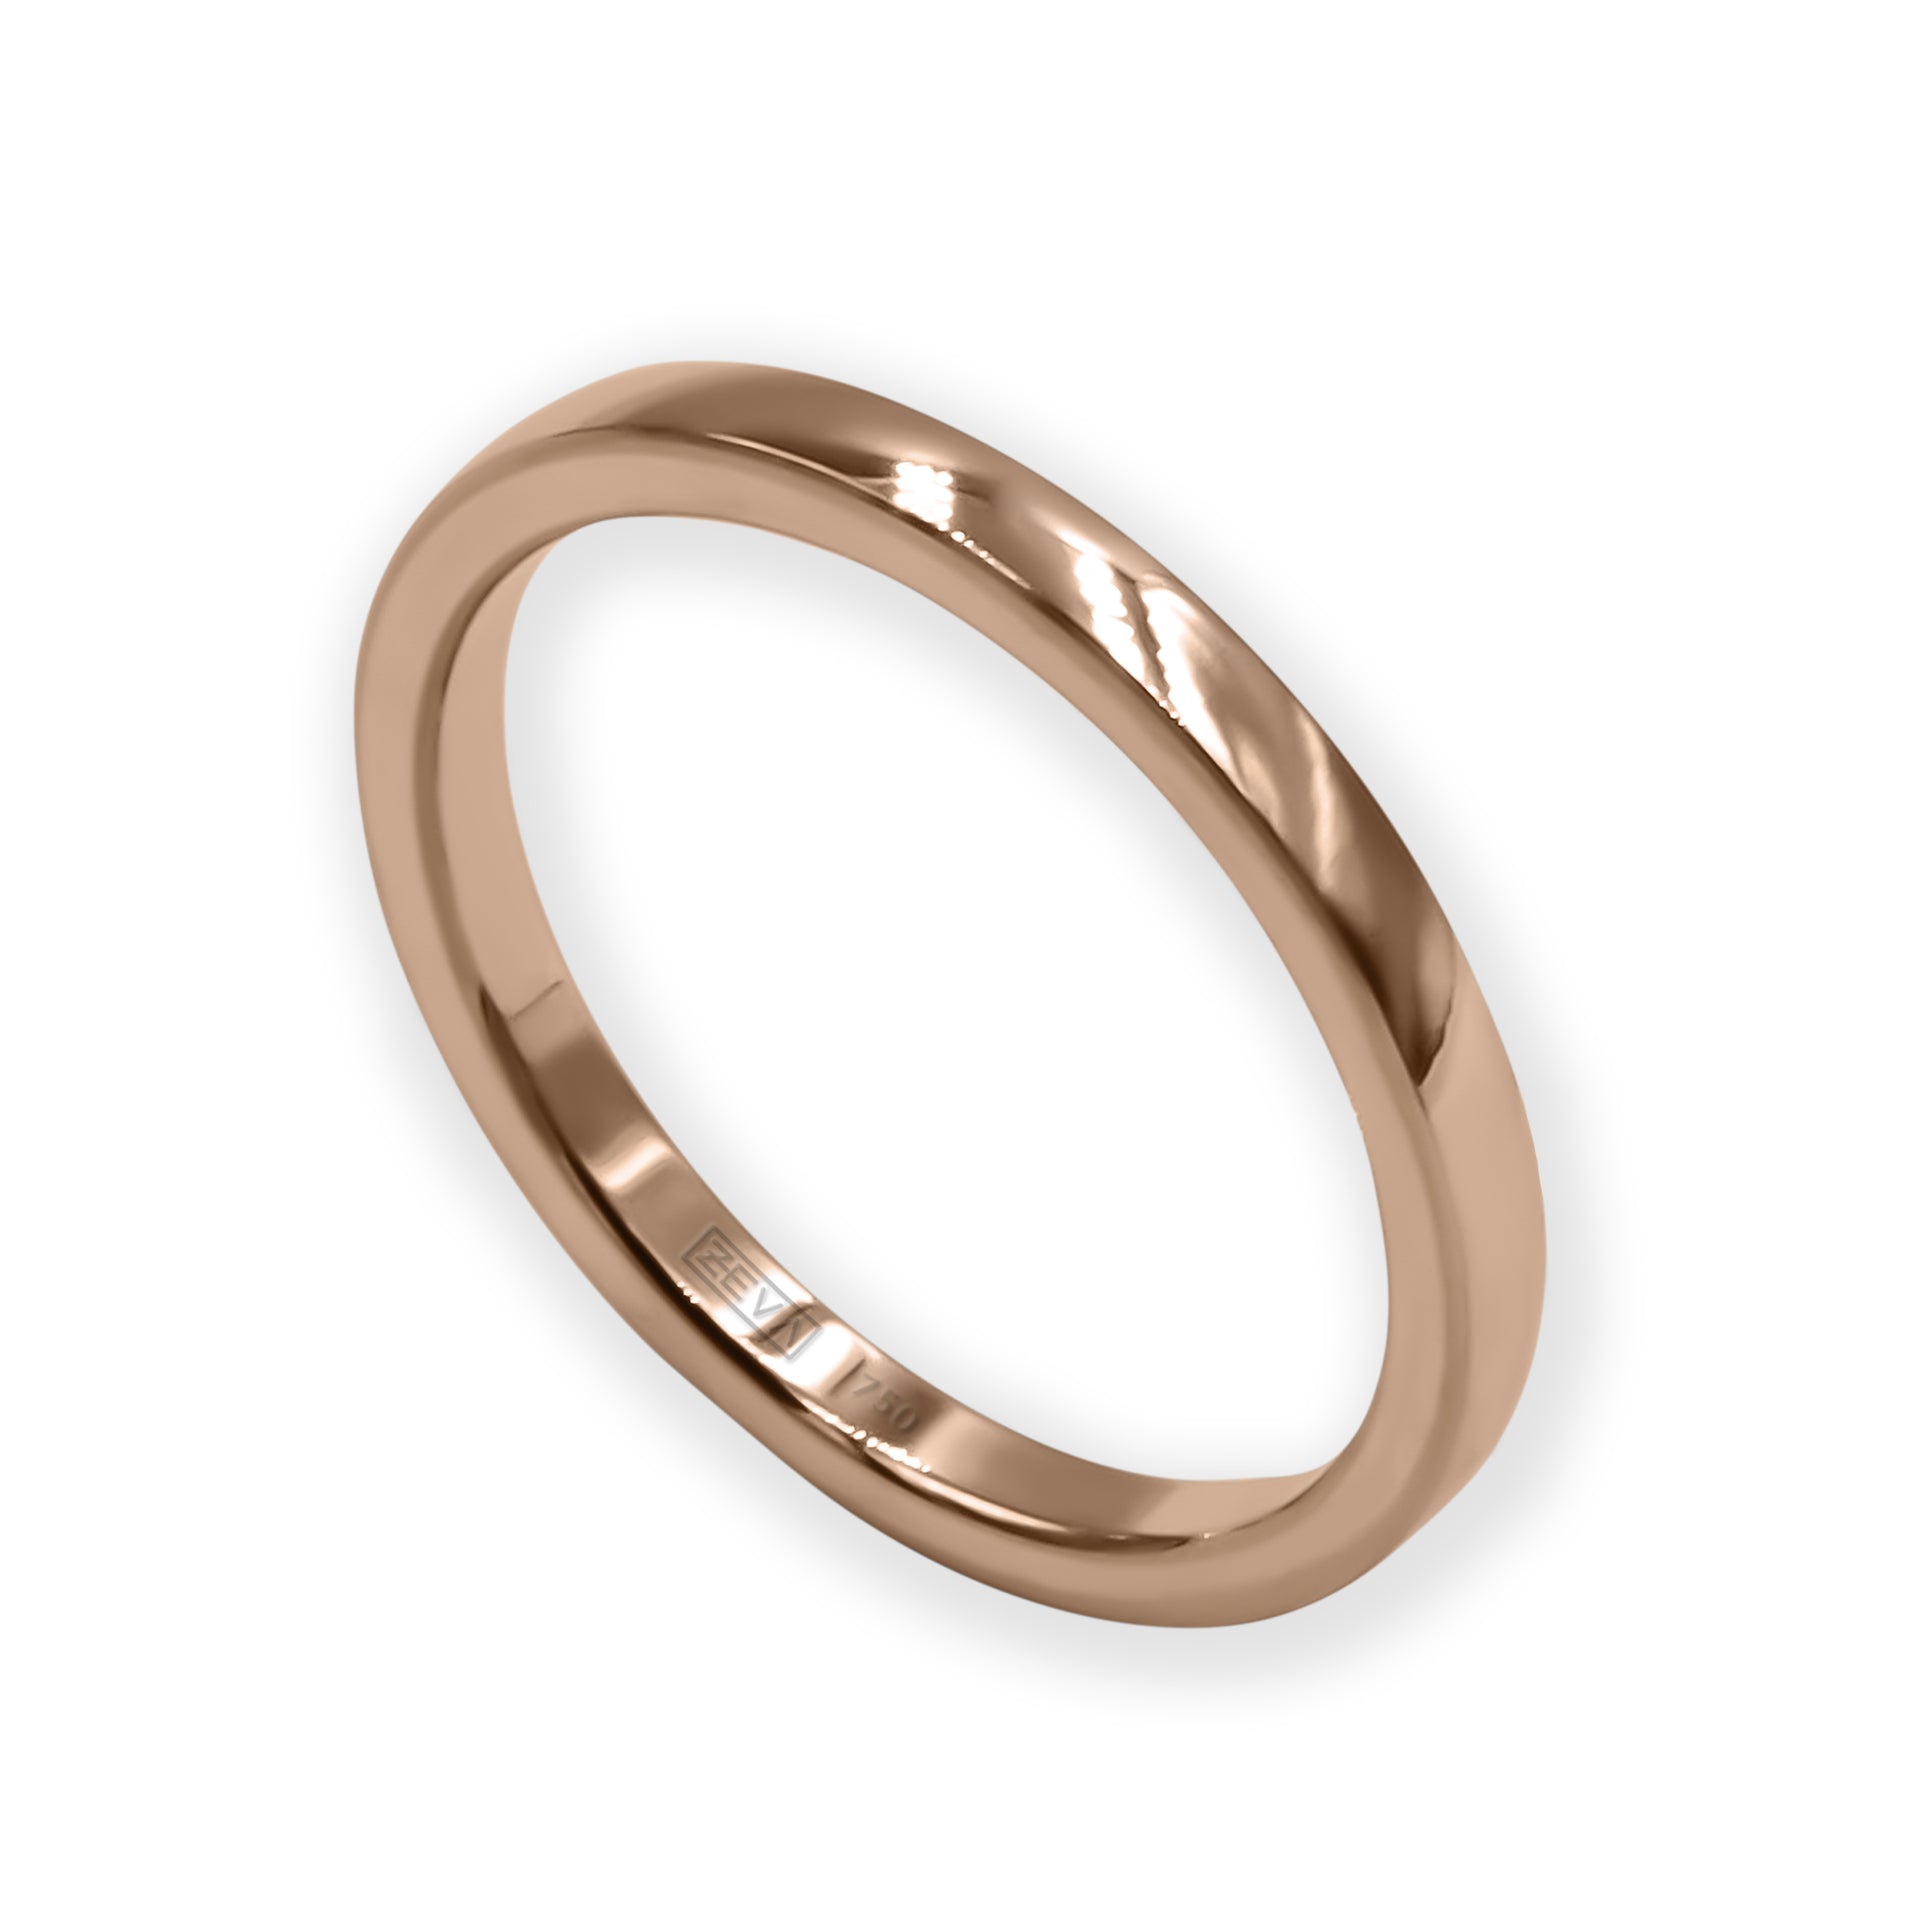 Ring EARTH IS ROUND 2mm round profile red gold 18k